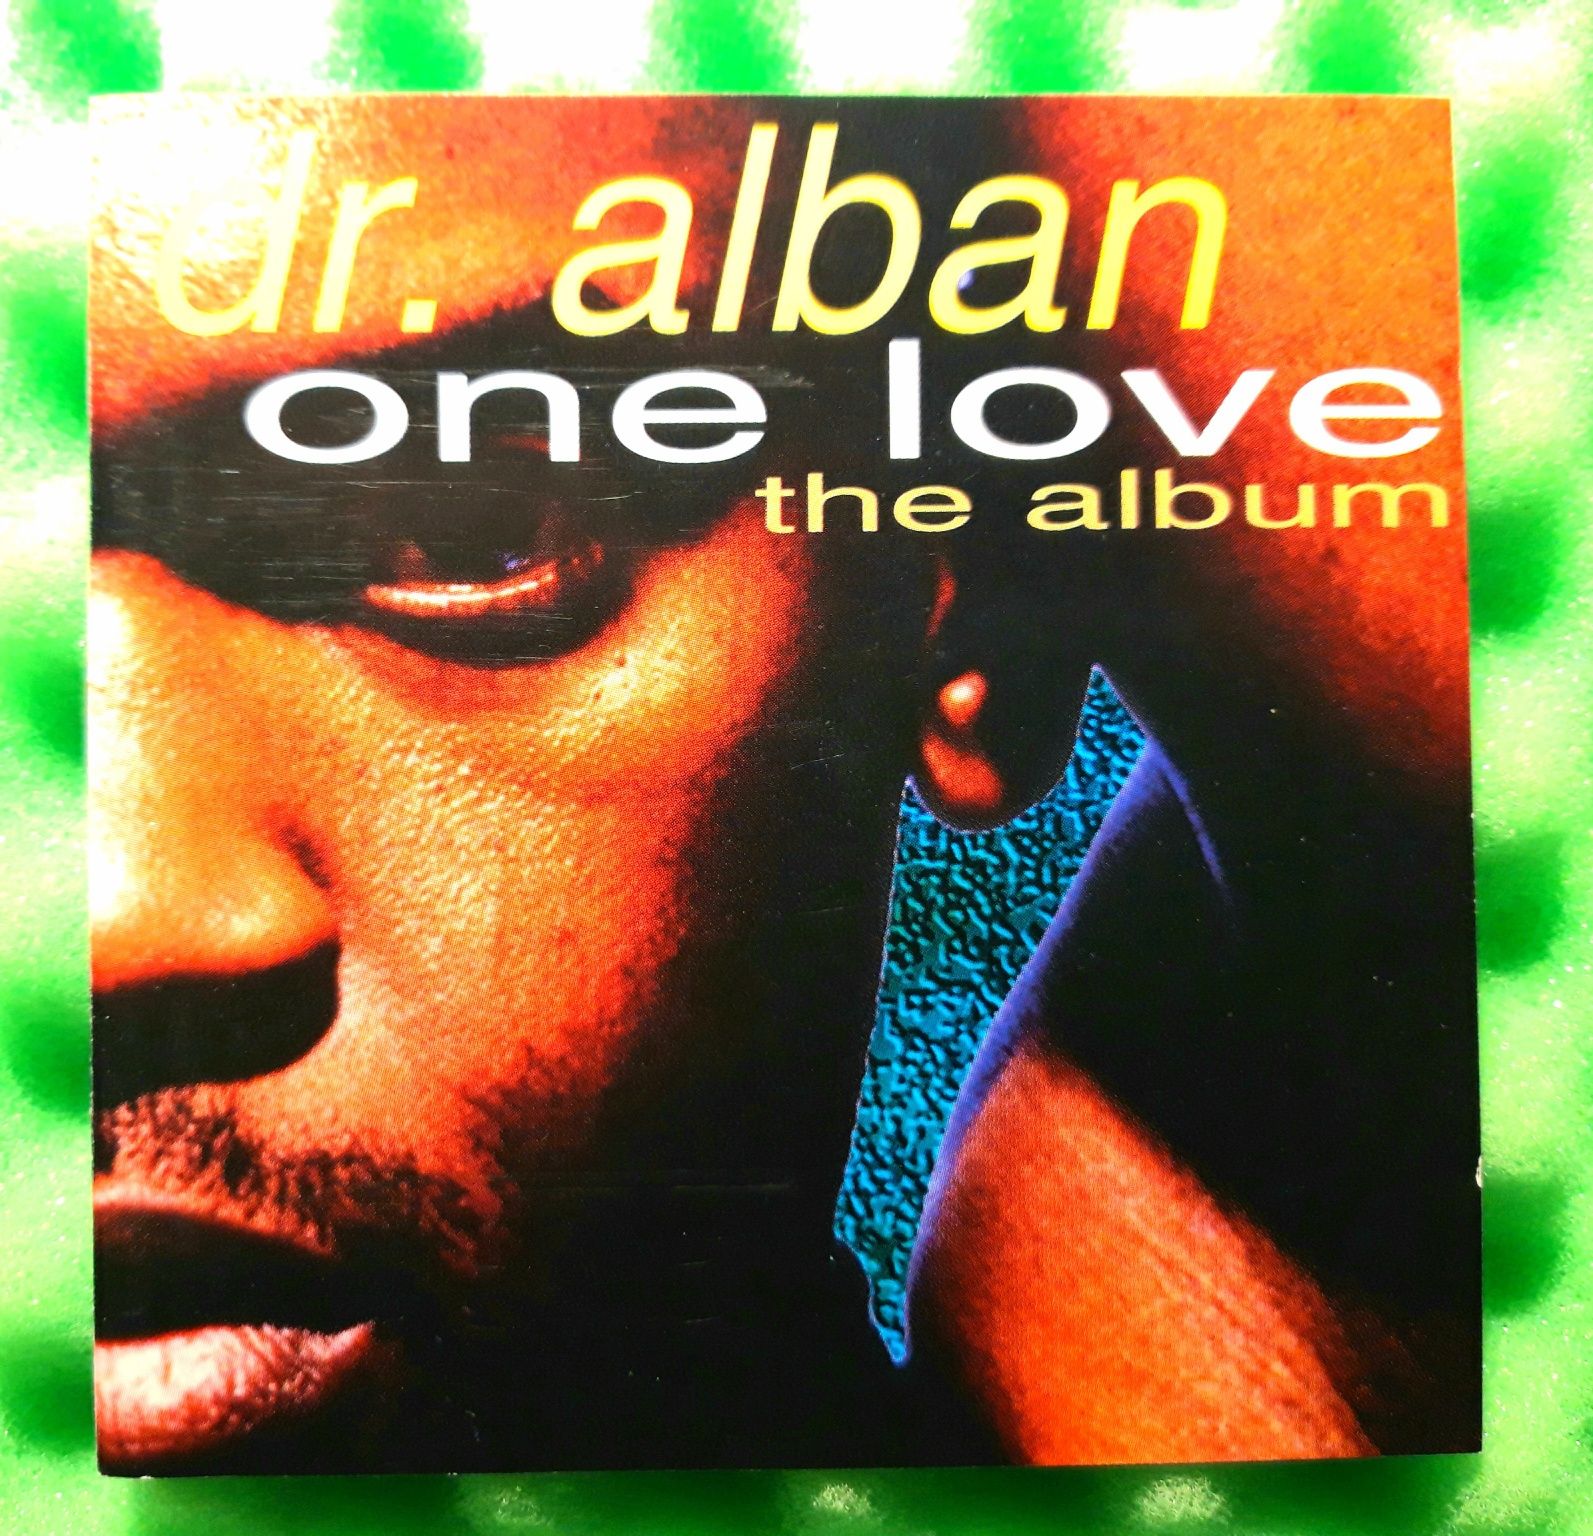 Dr. Alban – One Love (The Album) CD, 1992